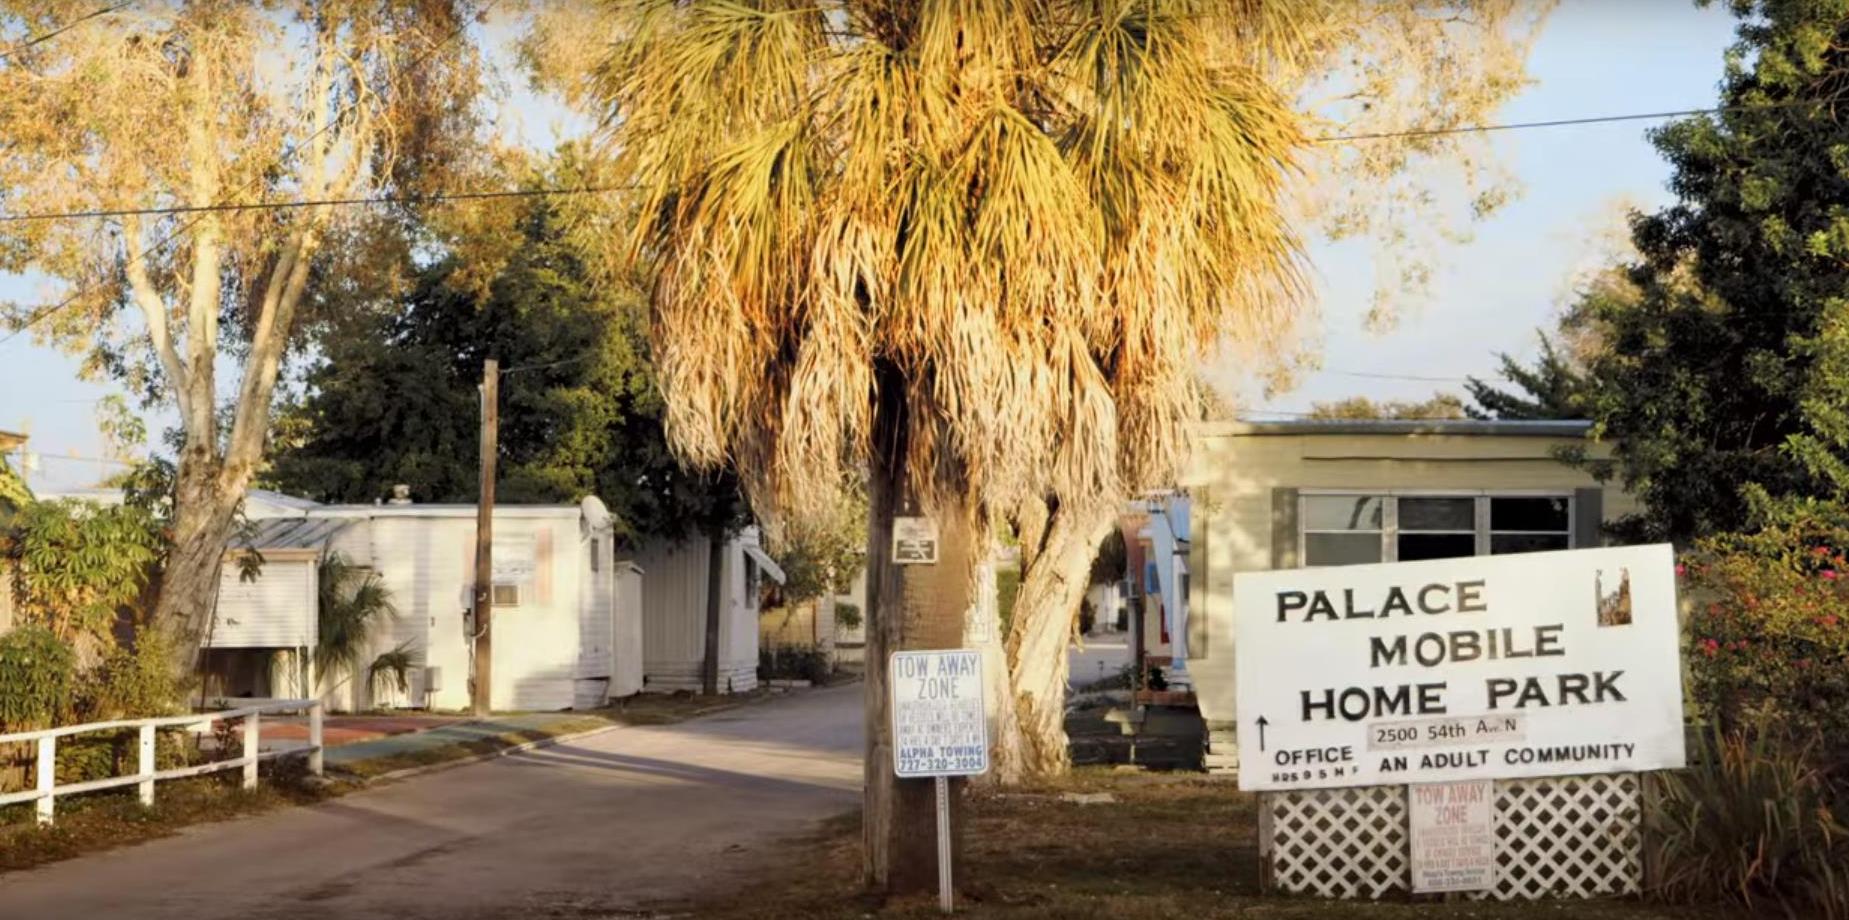 The Palace Mobile Home Park in western Florida nicknamed 